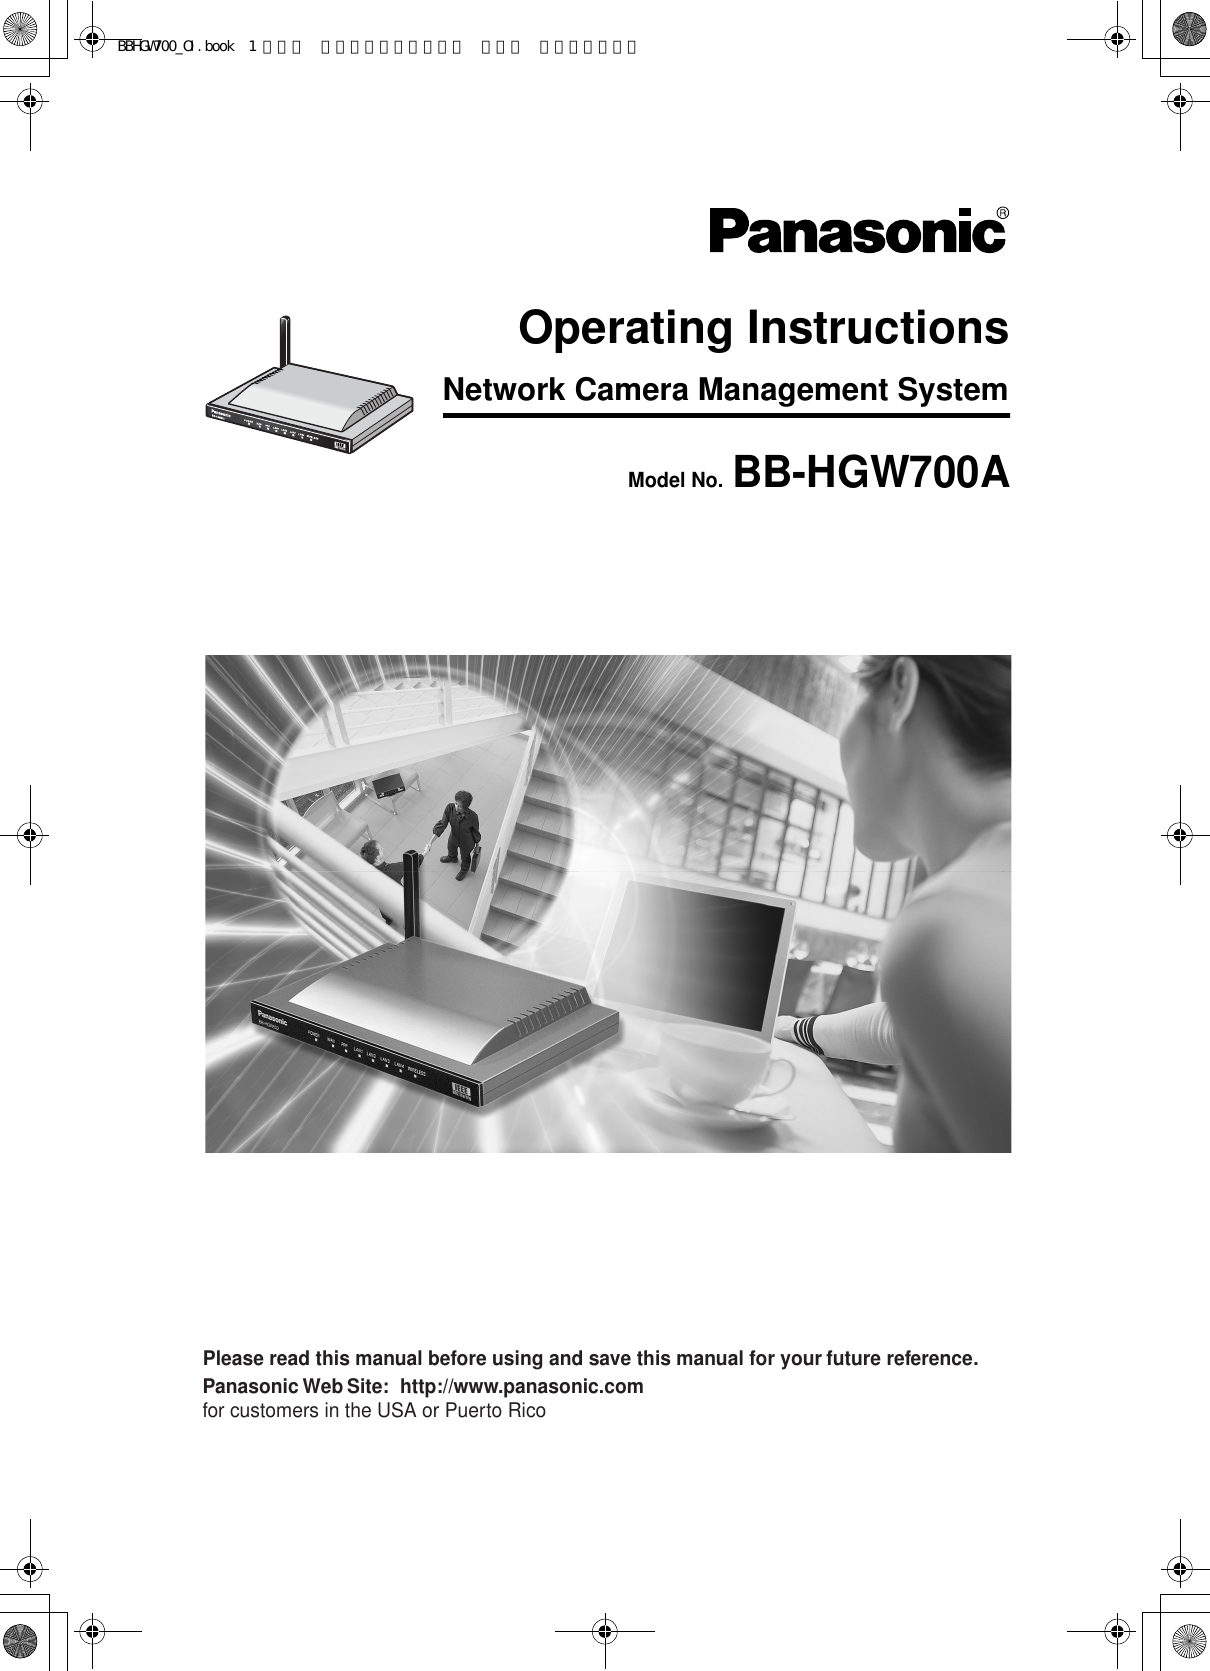 Network Camera Management SystemOperating InstructionsModel No. BB-HGW700APlease read this manual before using and save this manual for your     future reference.Panasonic Web Site:  http://www.panasonic.comfor customers in the USA or Puerto RicoBBHGW700_OI.book  1 ページ  ２００４年９月２７日 月曜日 午後６時５８分